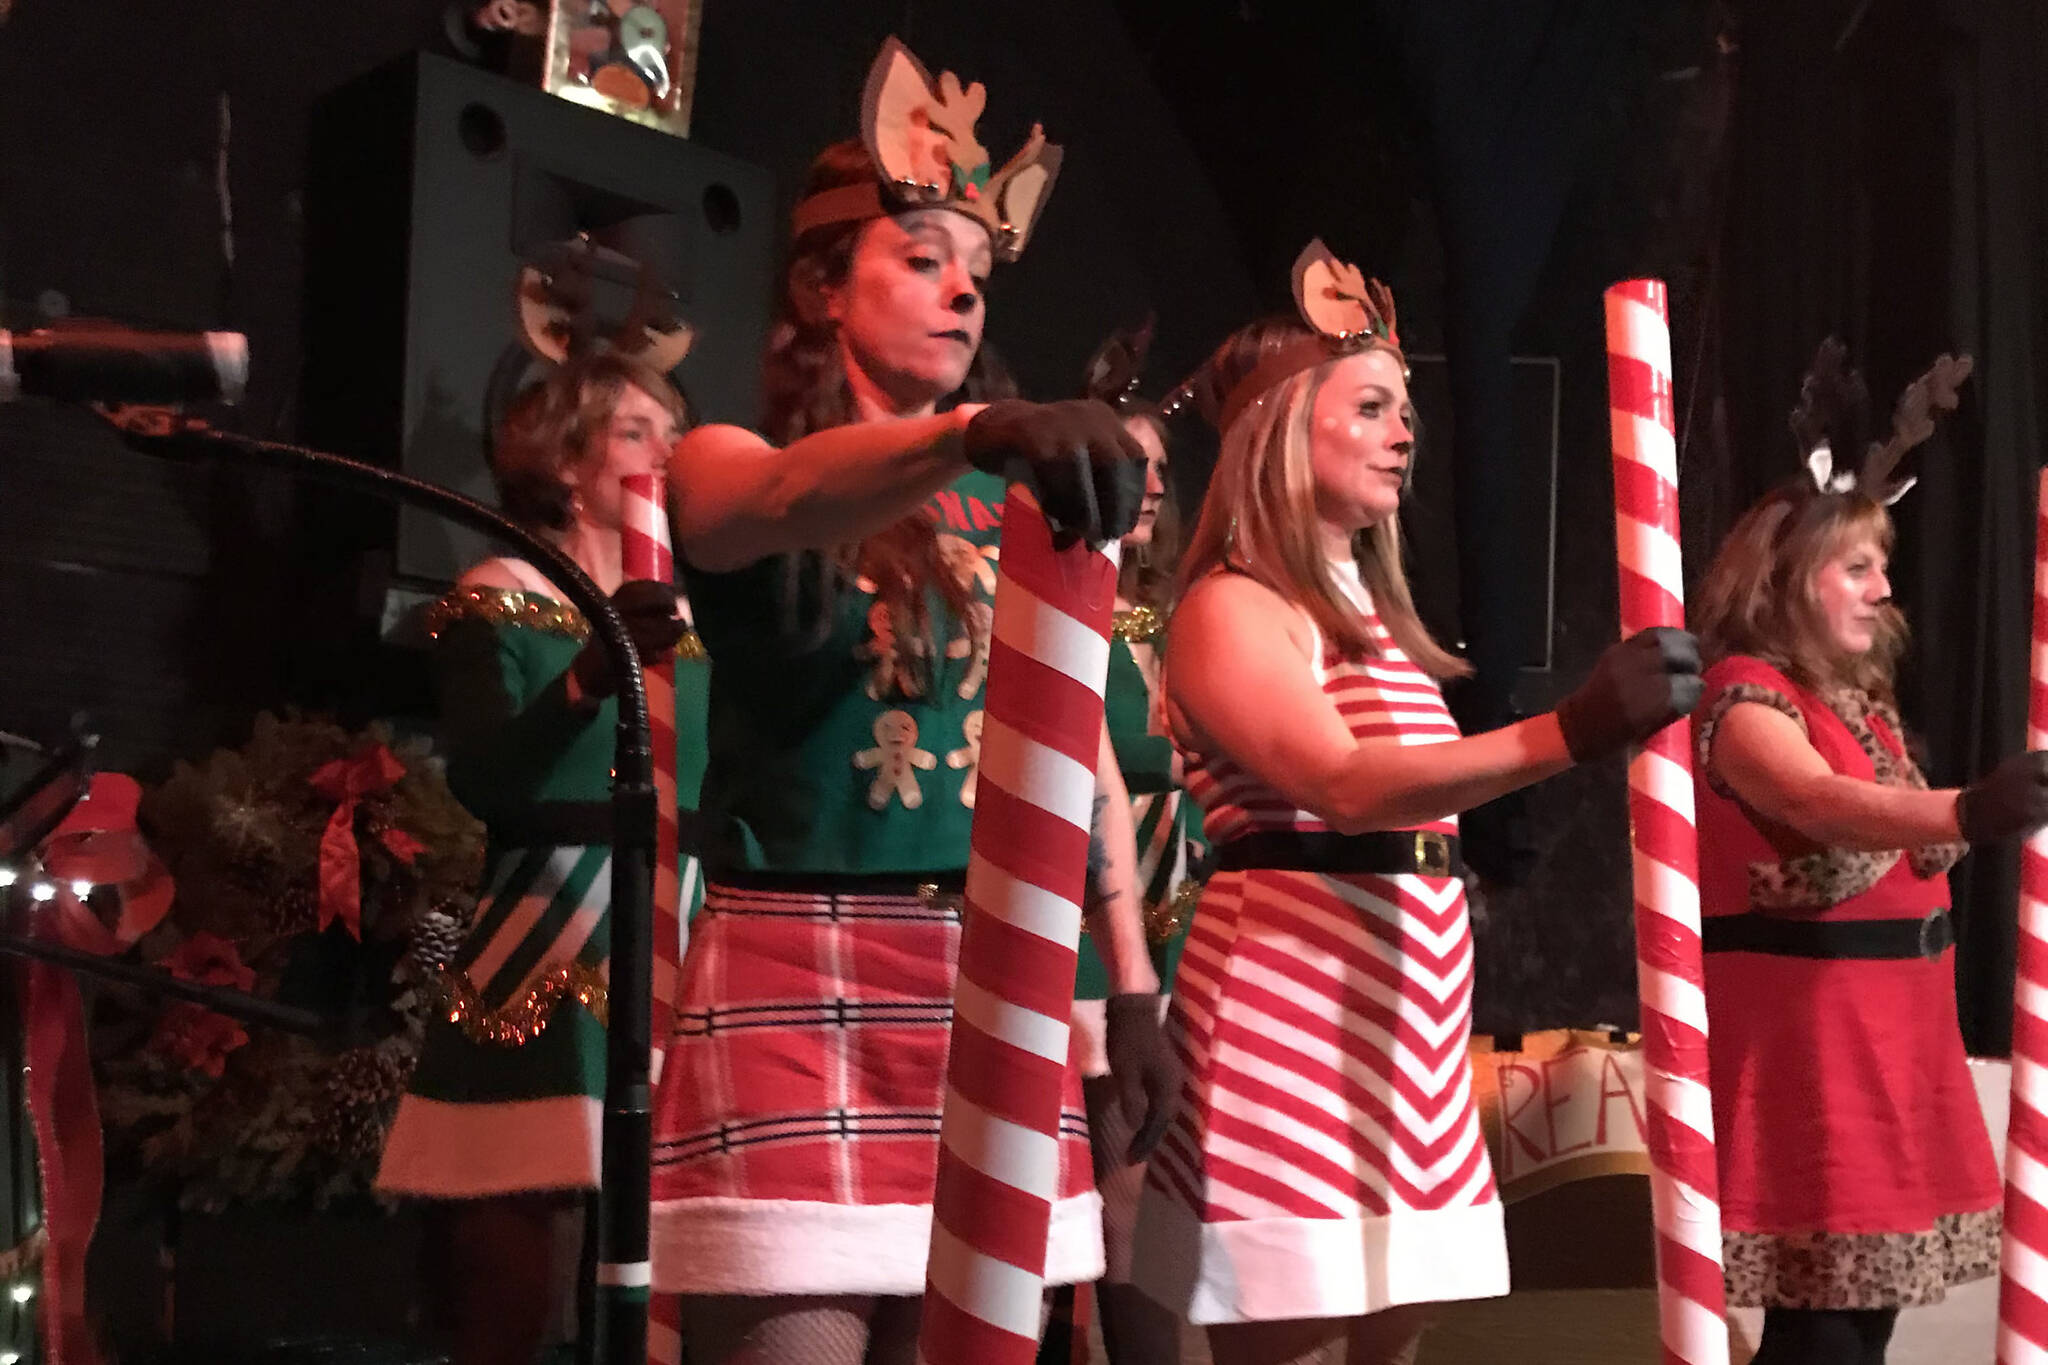 Performers in the Gold Town Theater’s virtual 2020 Christmas Extravaganza stand ready. This year’s event will involve performers traveling from location to location performing smaller sets. (Courtesy photo / Collette Costa)